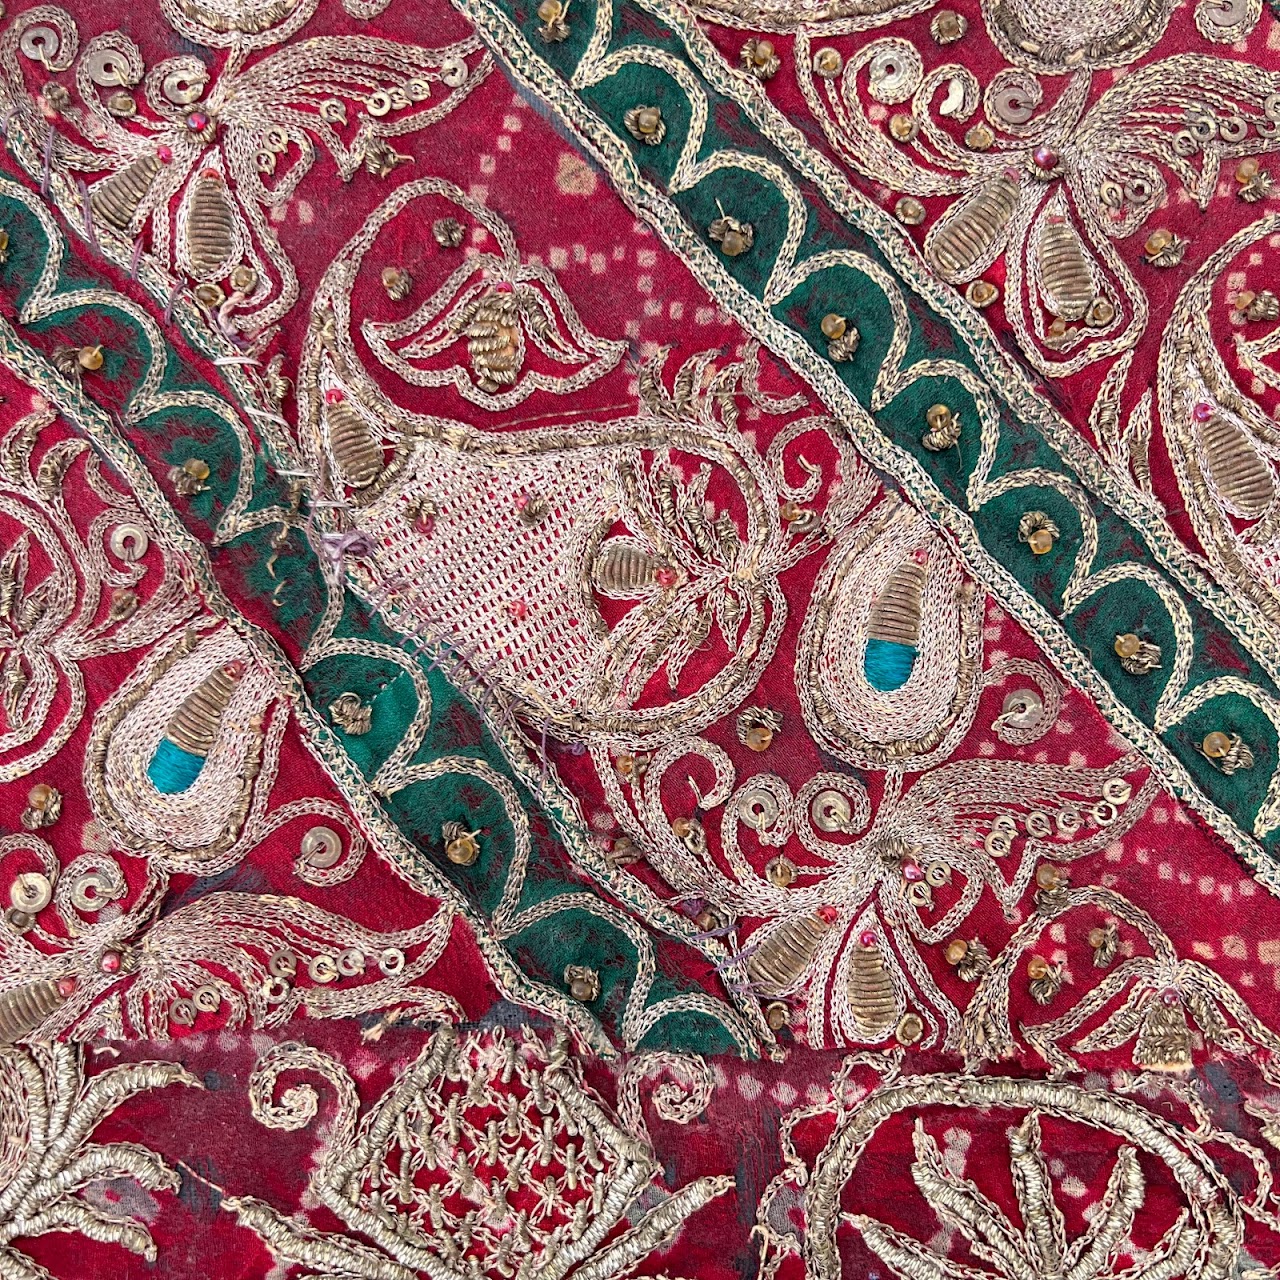 Rajasthani Embroidered Indian Textile